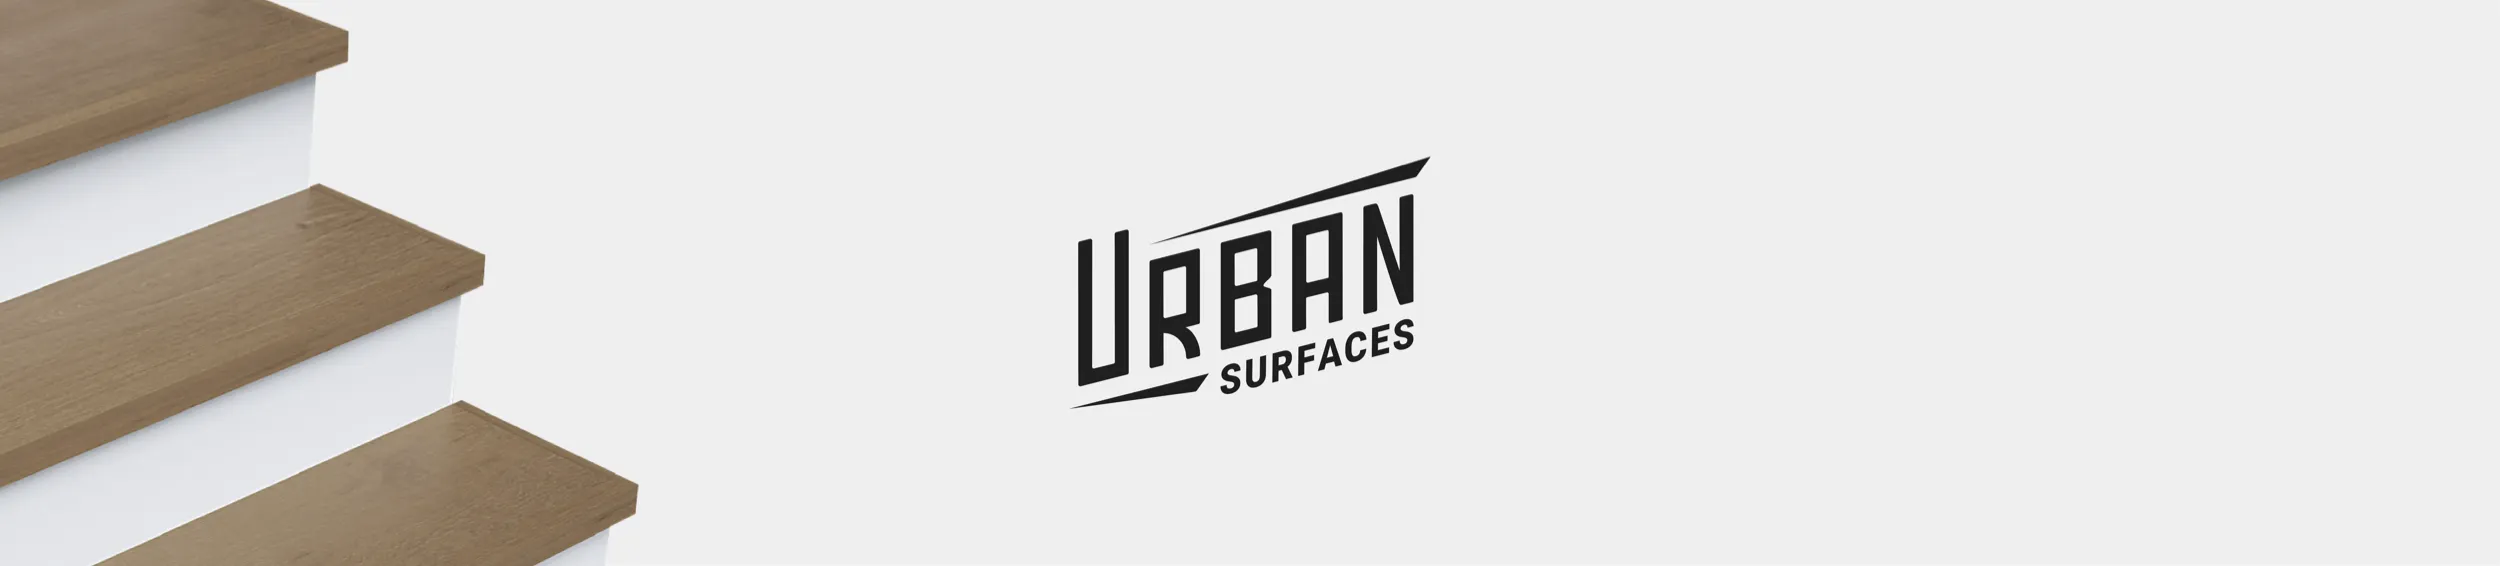 An Urban Surfaces banner with logo in the middle on a white background and installed stair treads and risers on the left.